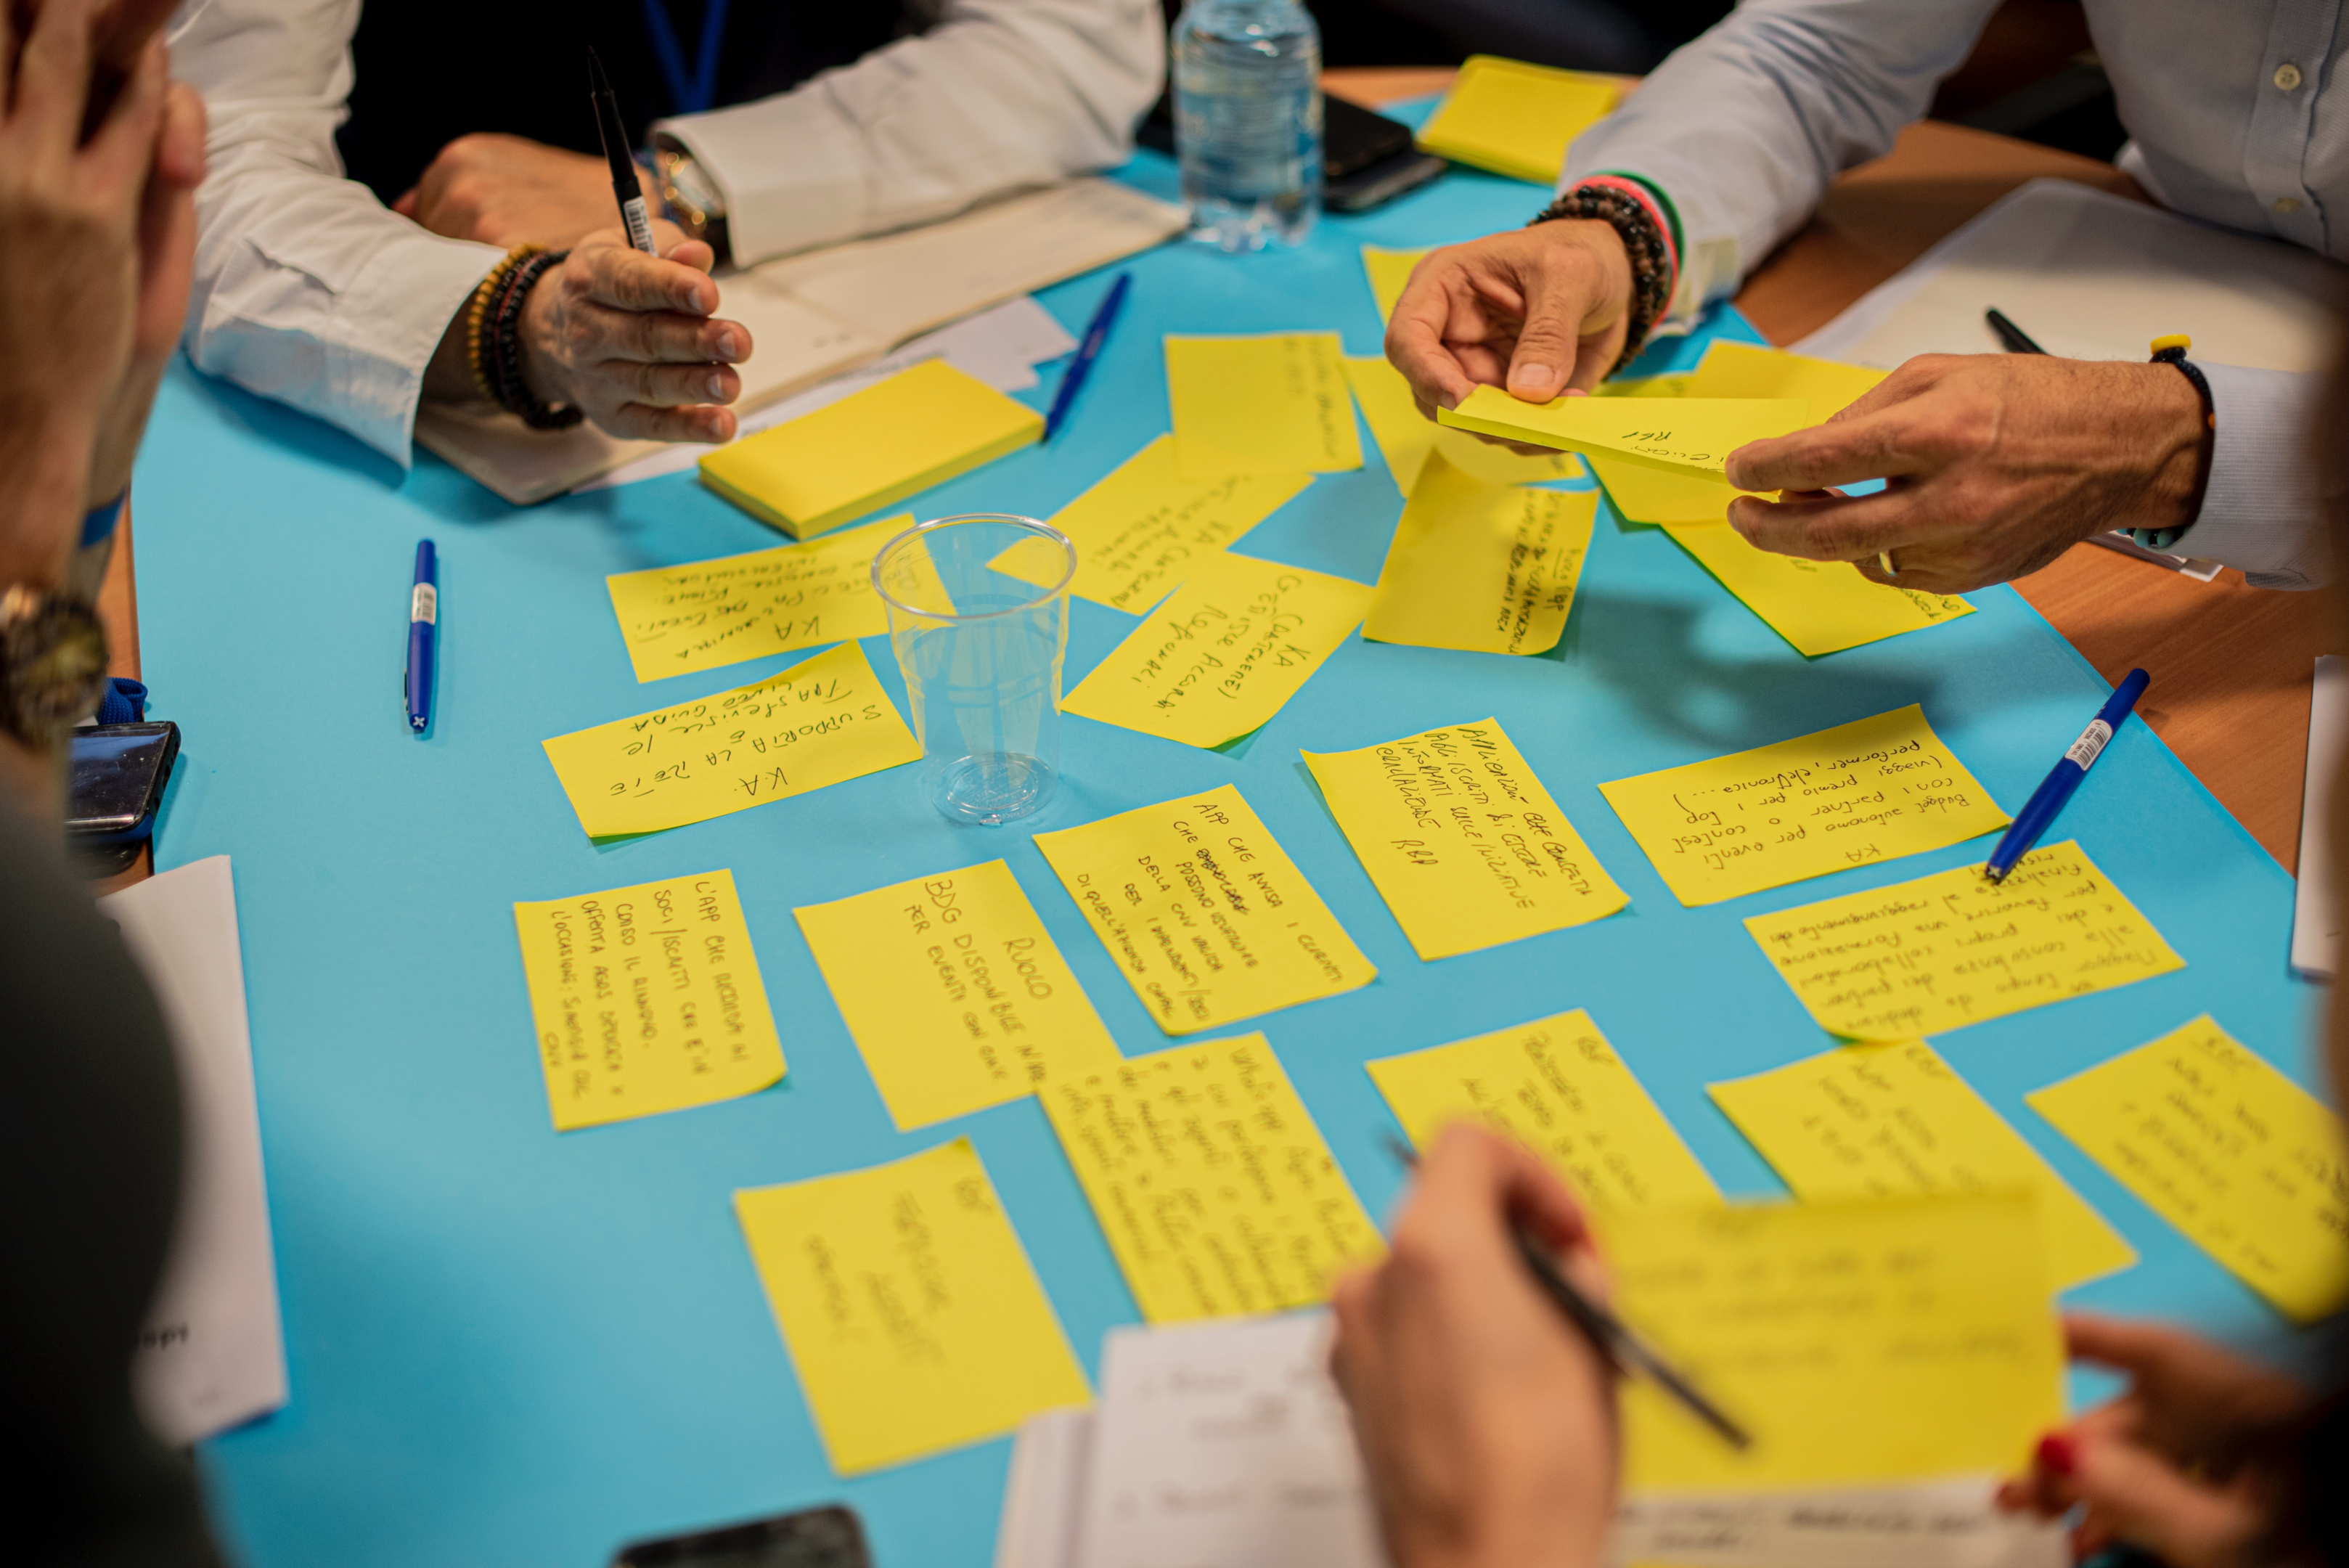 Ideation in the Design Thinking Process